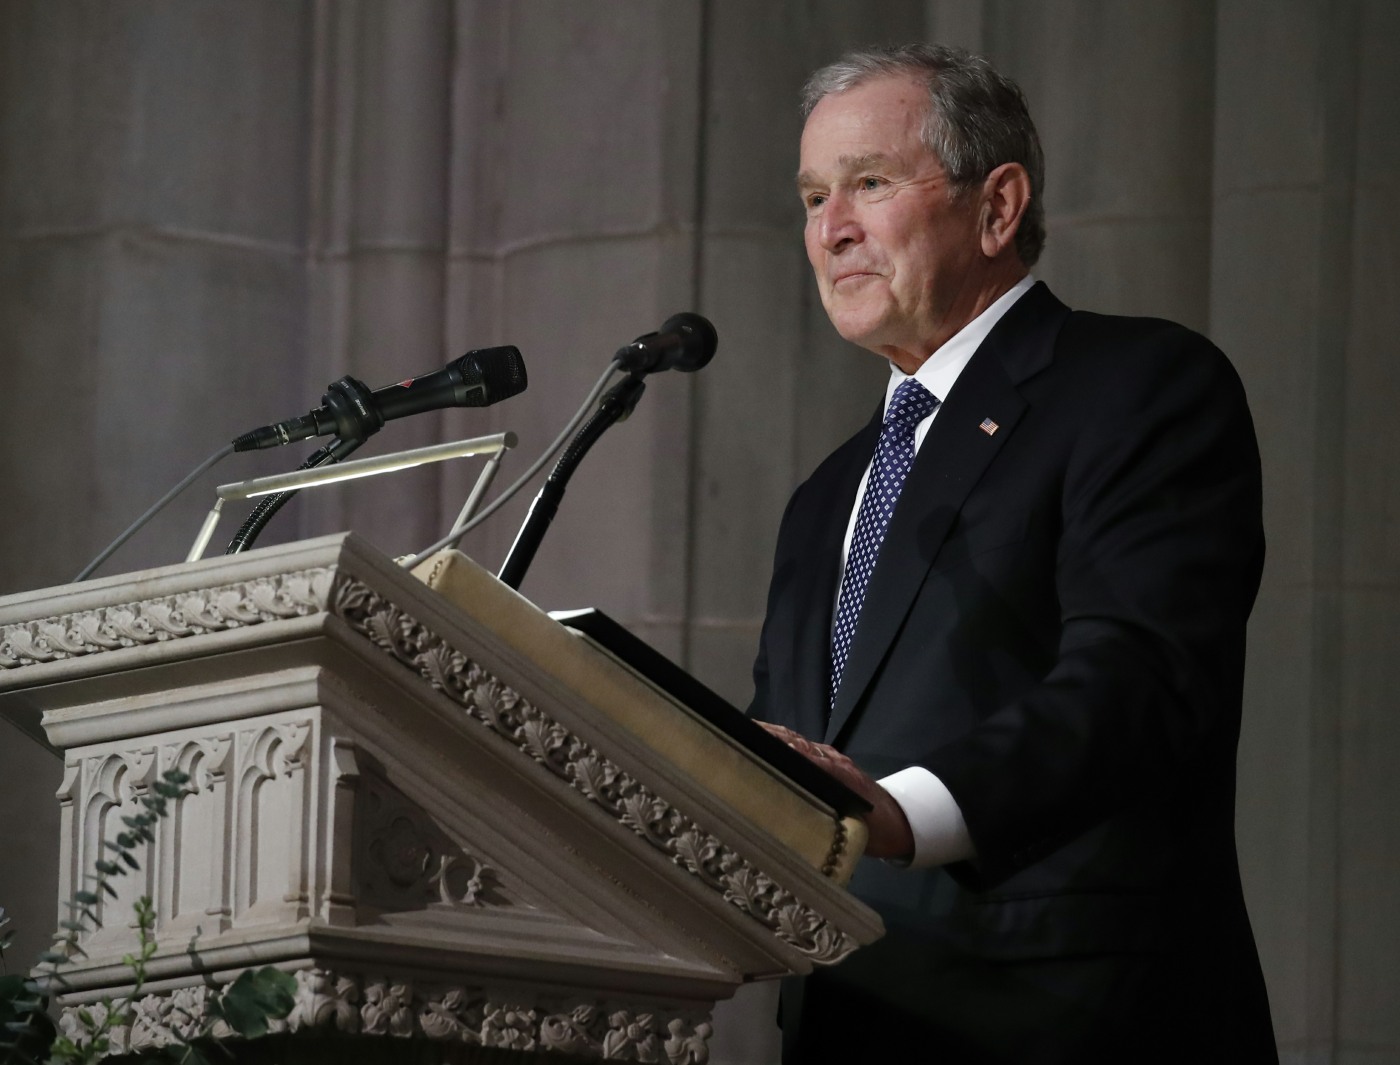 State Funeral for former United States President George H.W. Bush